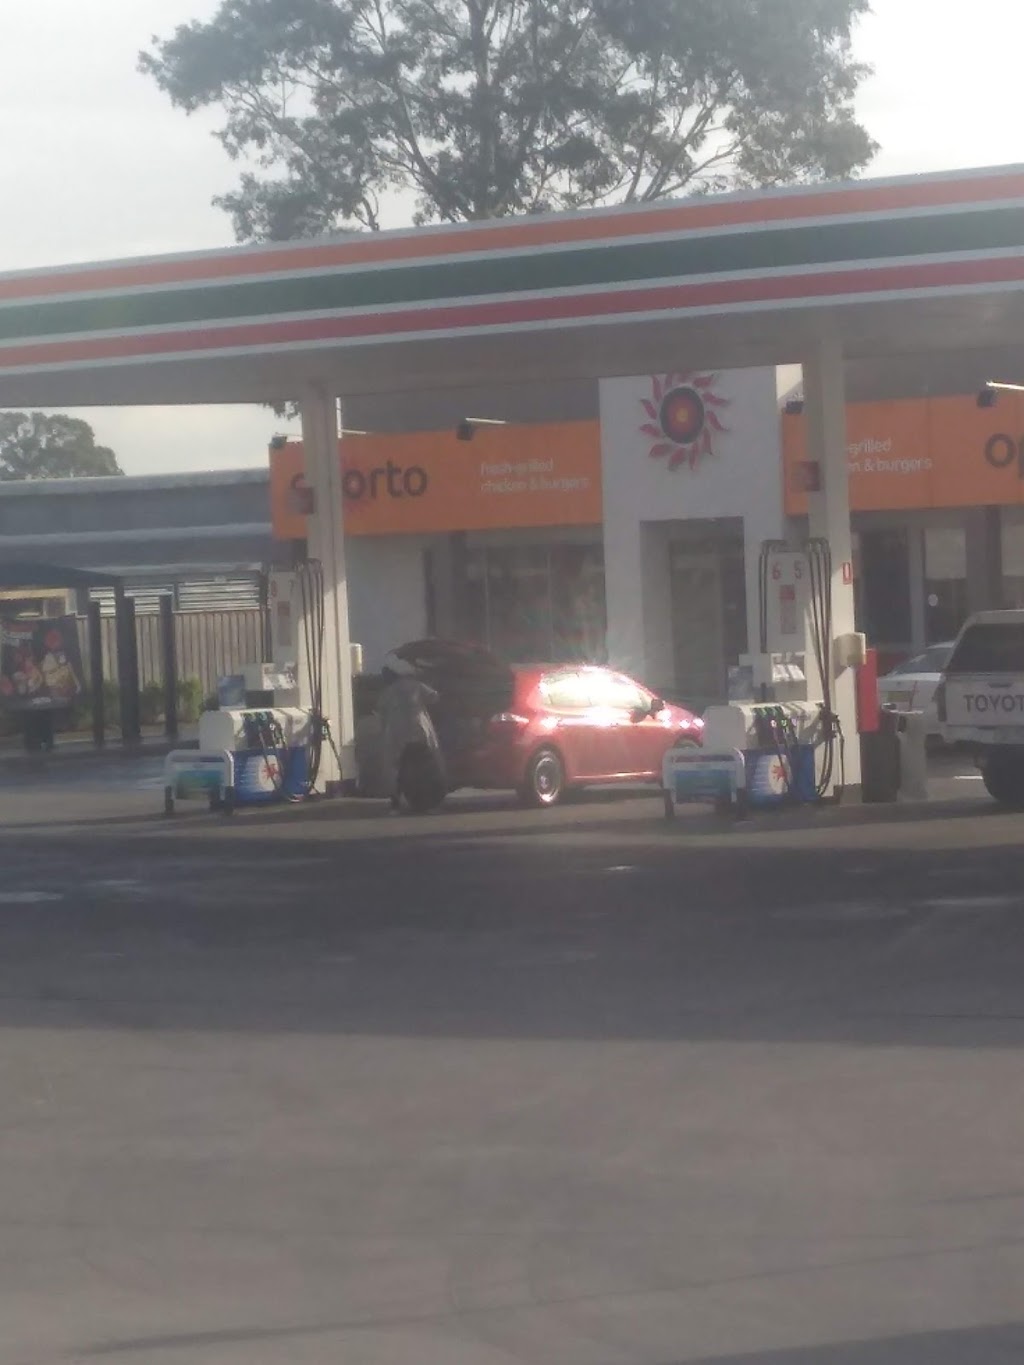 7-Eleven Guildford | gas station | 272-278 Woodville Rd, Guildford NSW 2161, Australia | 0296812915 OR +61 2 9681 2915